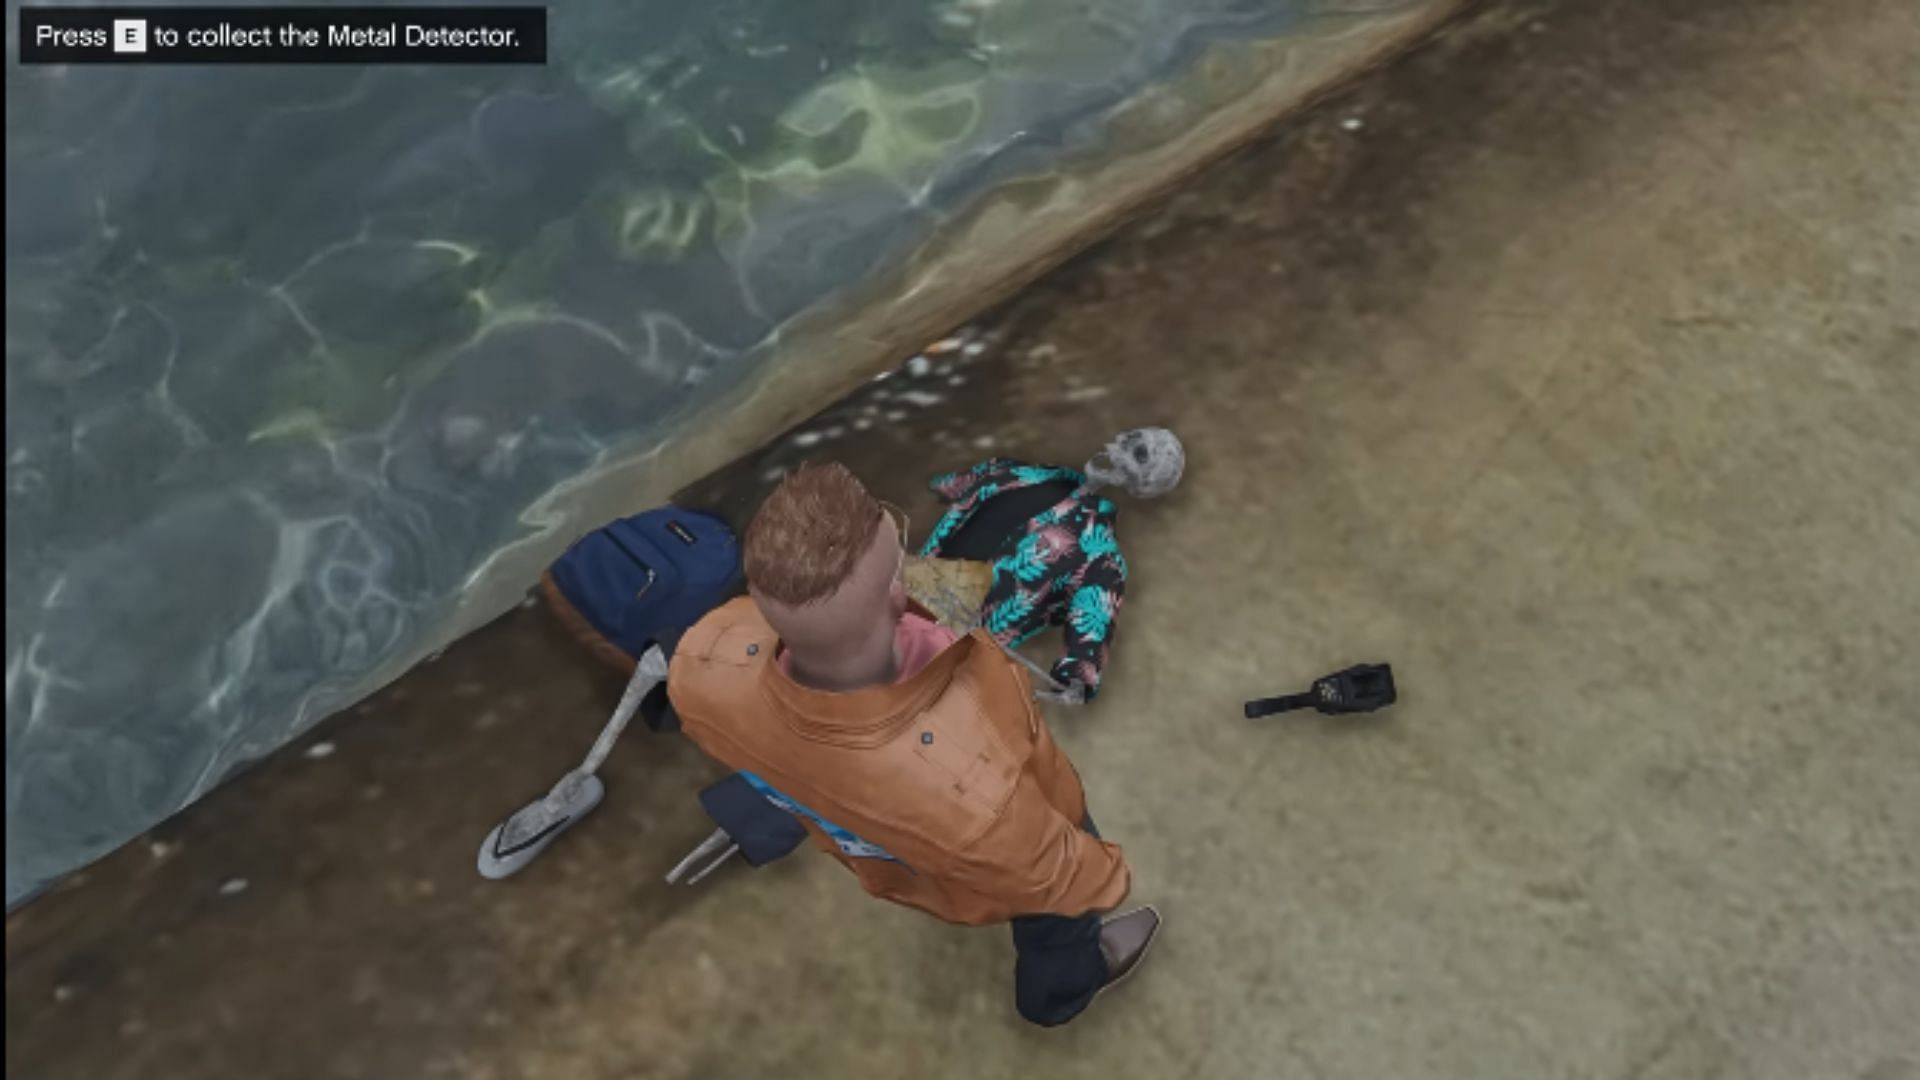 Stand near the skeleton and press the prompted button to collect the metal detector. (Image via YouTube/GTA Series Videos)